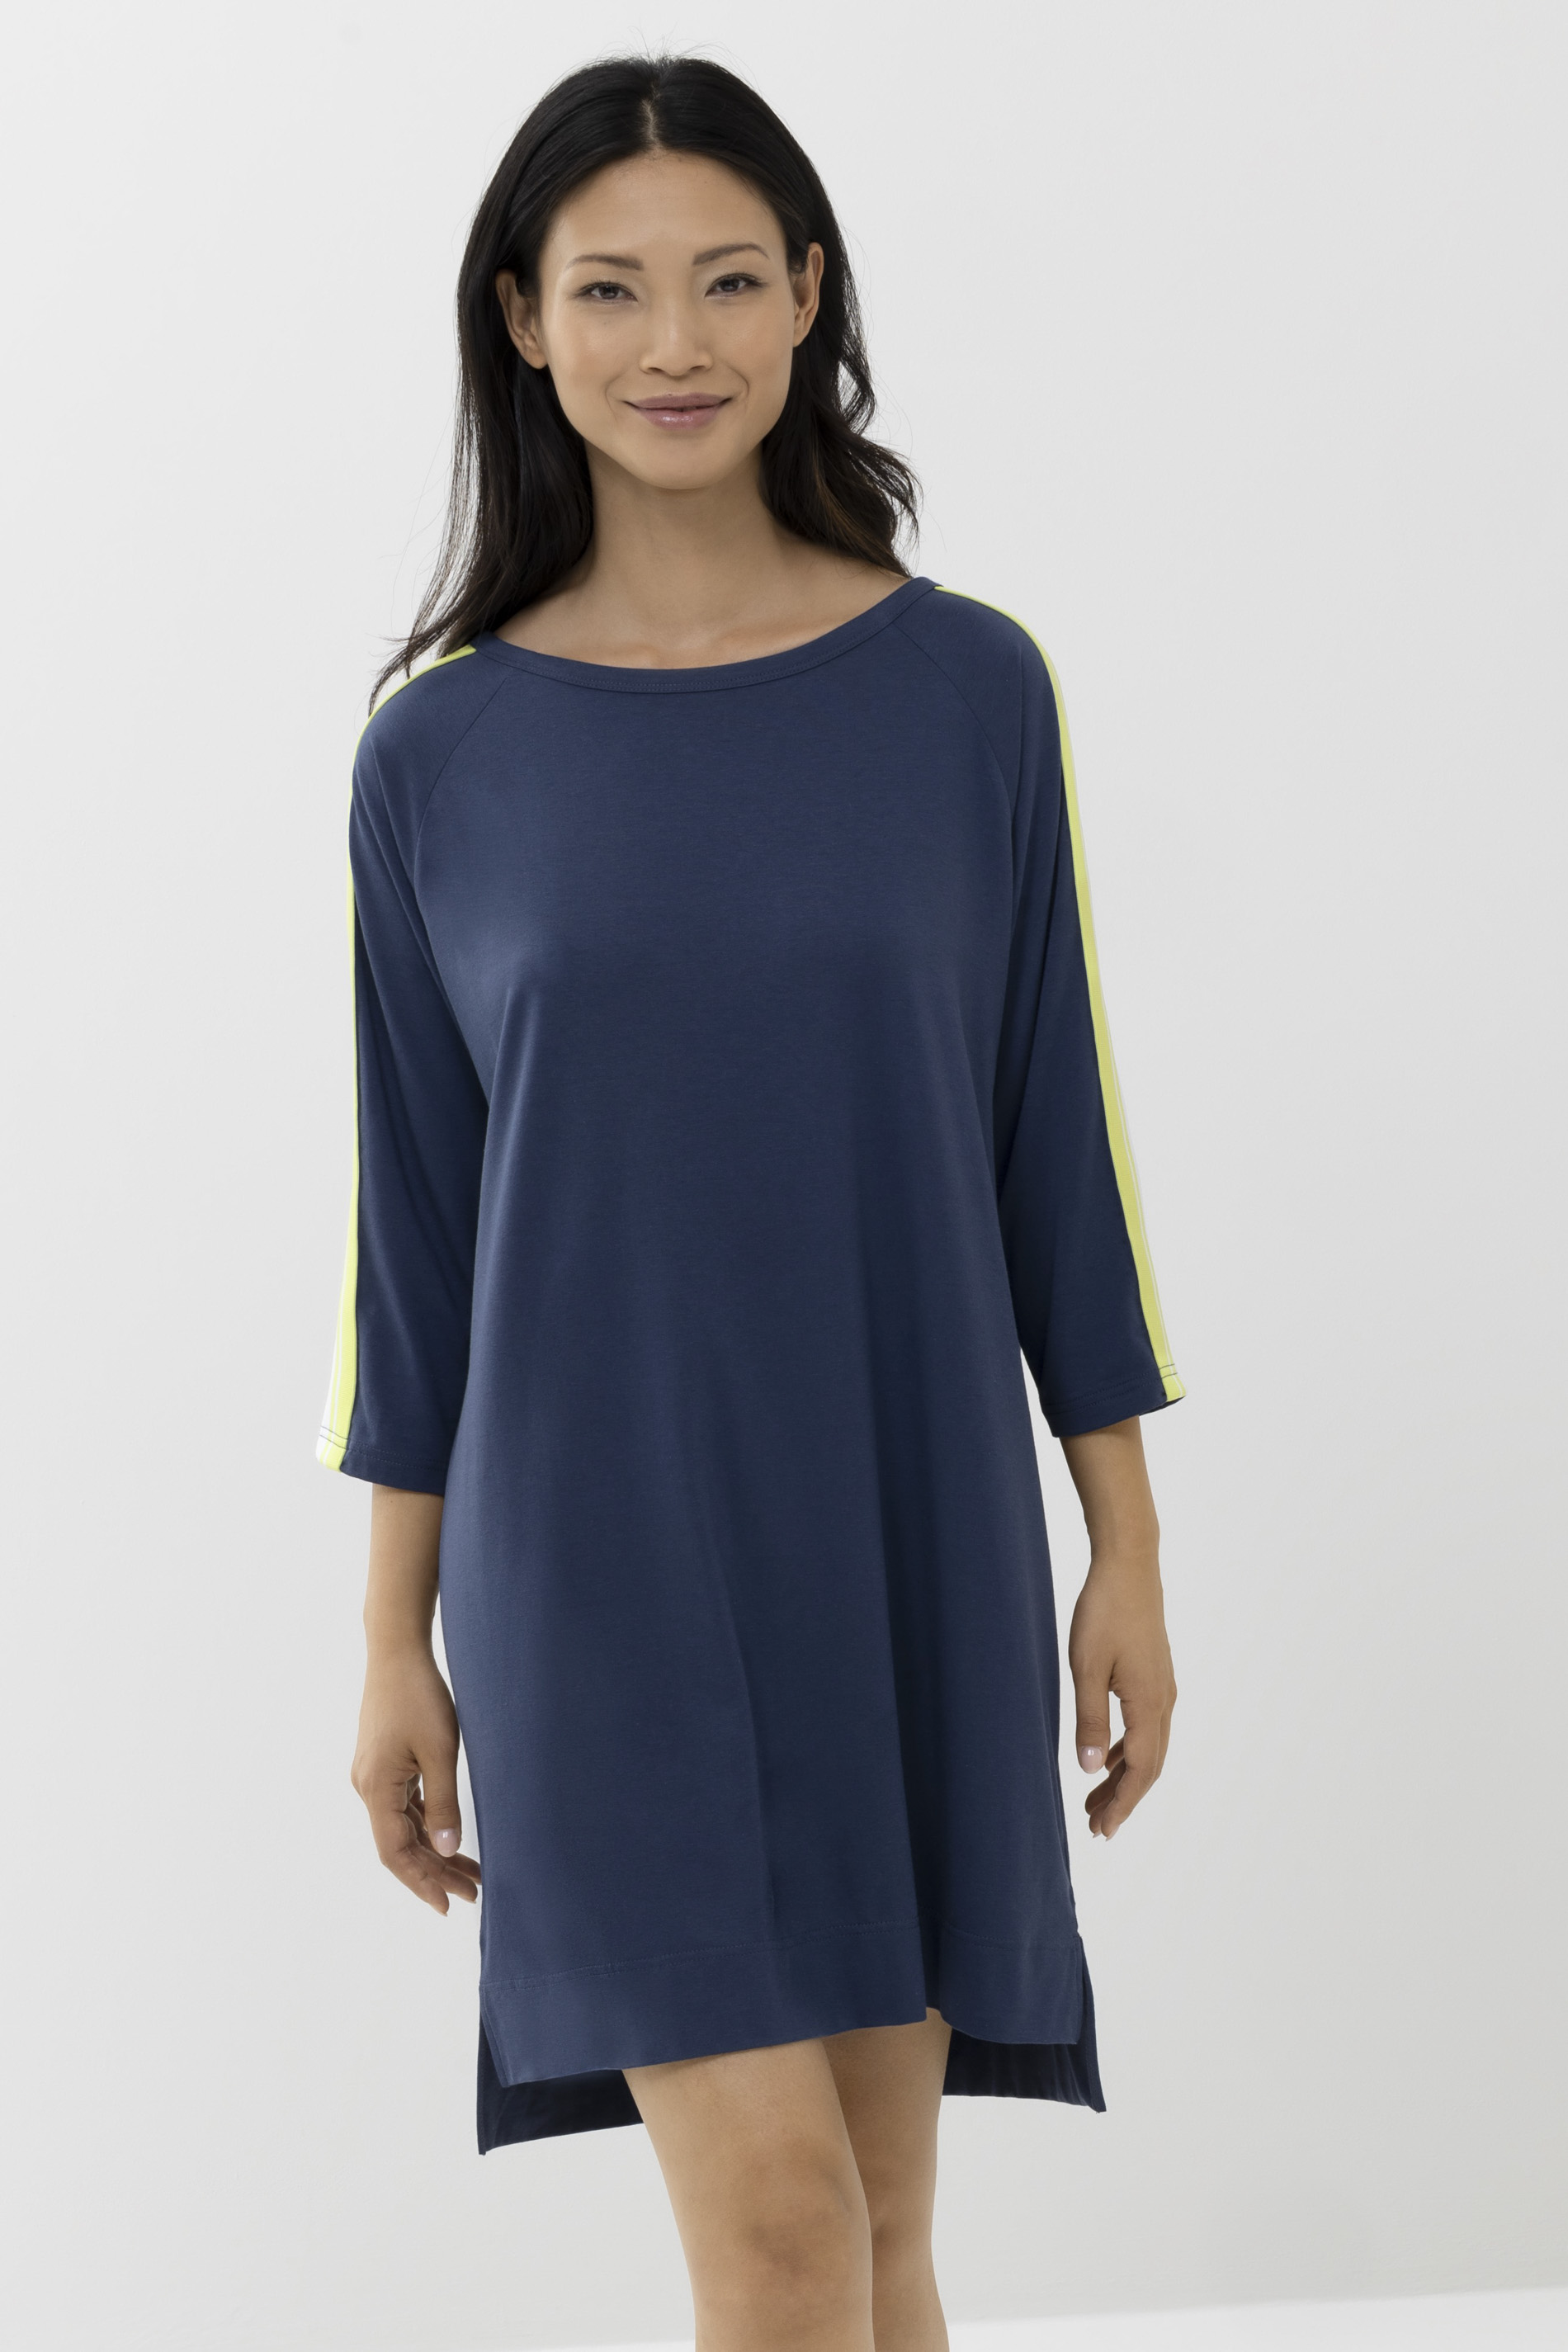 Nightshirt Serie Tala Front View | mey®